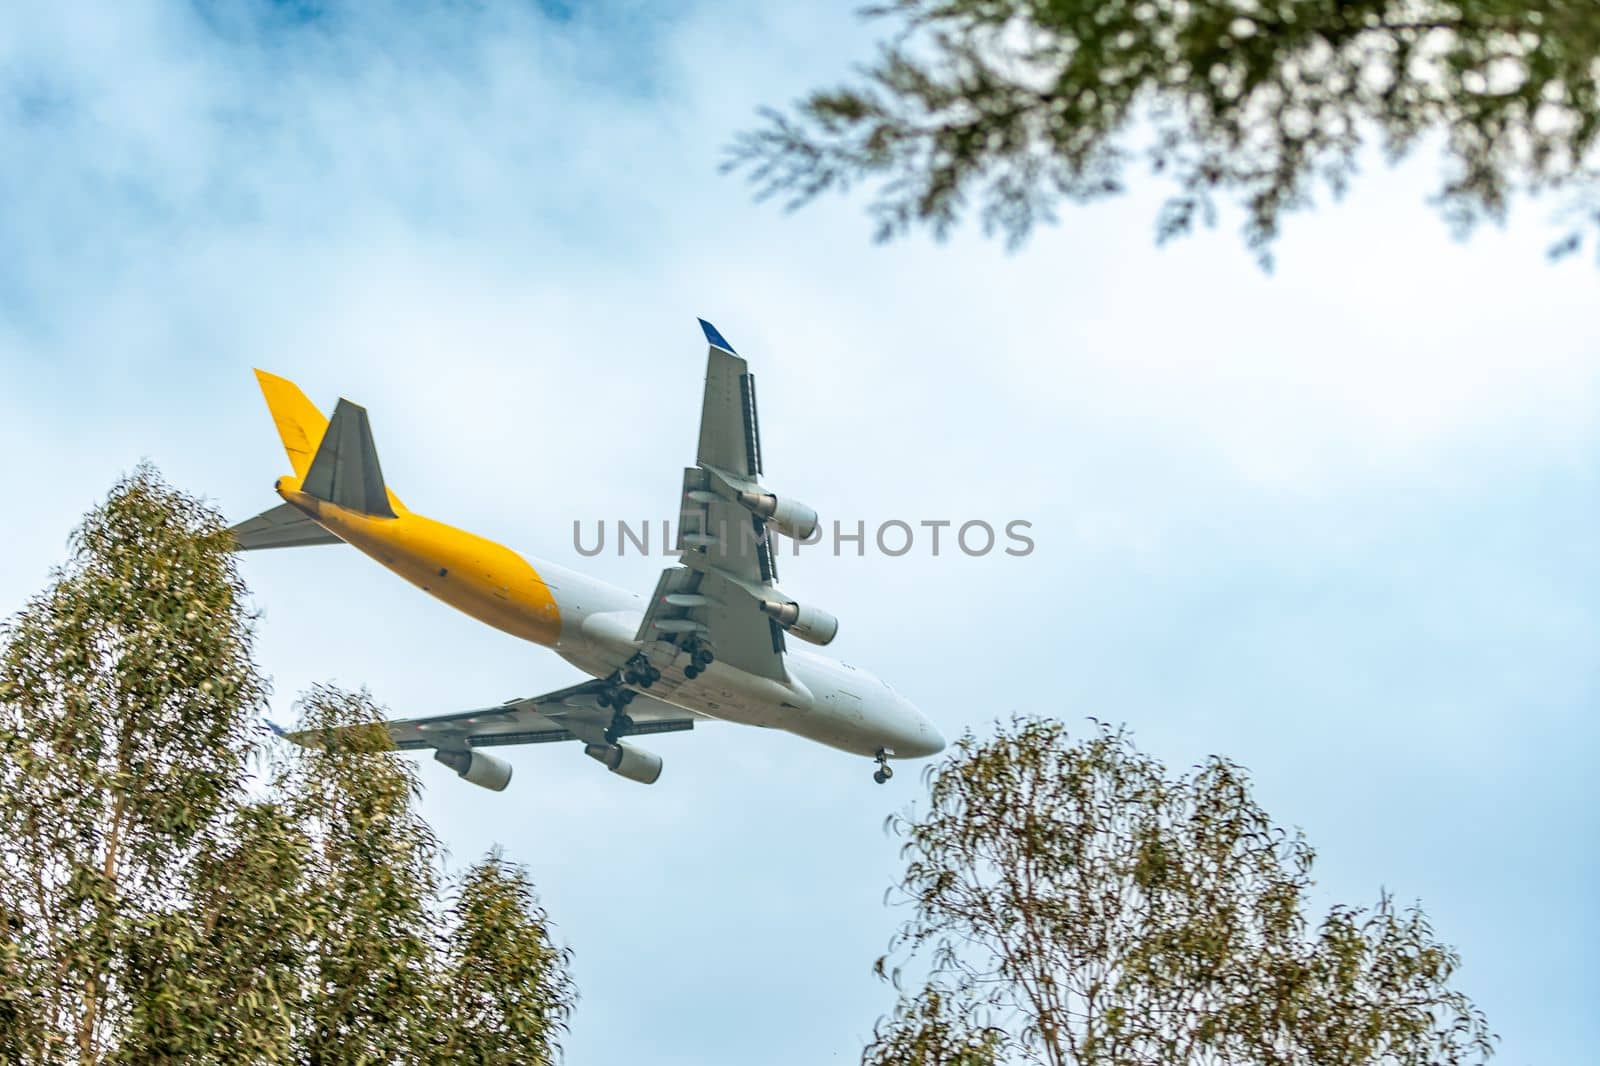 the airplane lands above the treetops by Edophoto